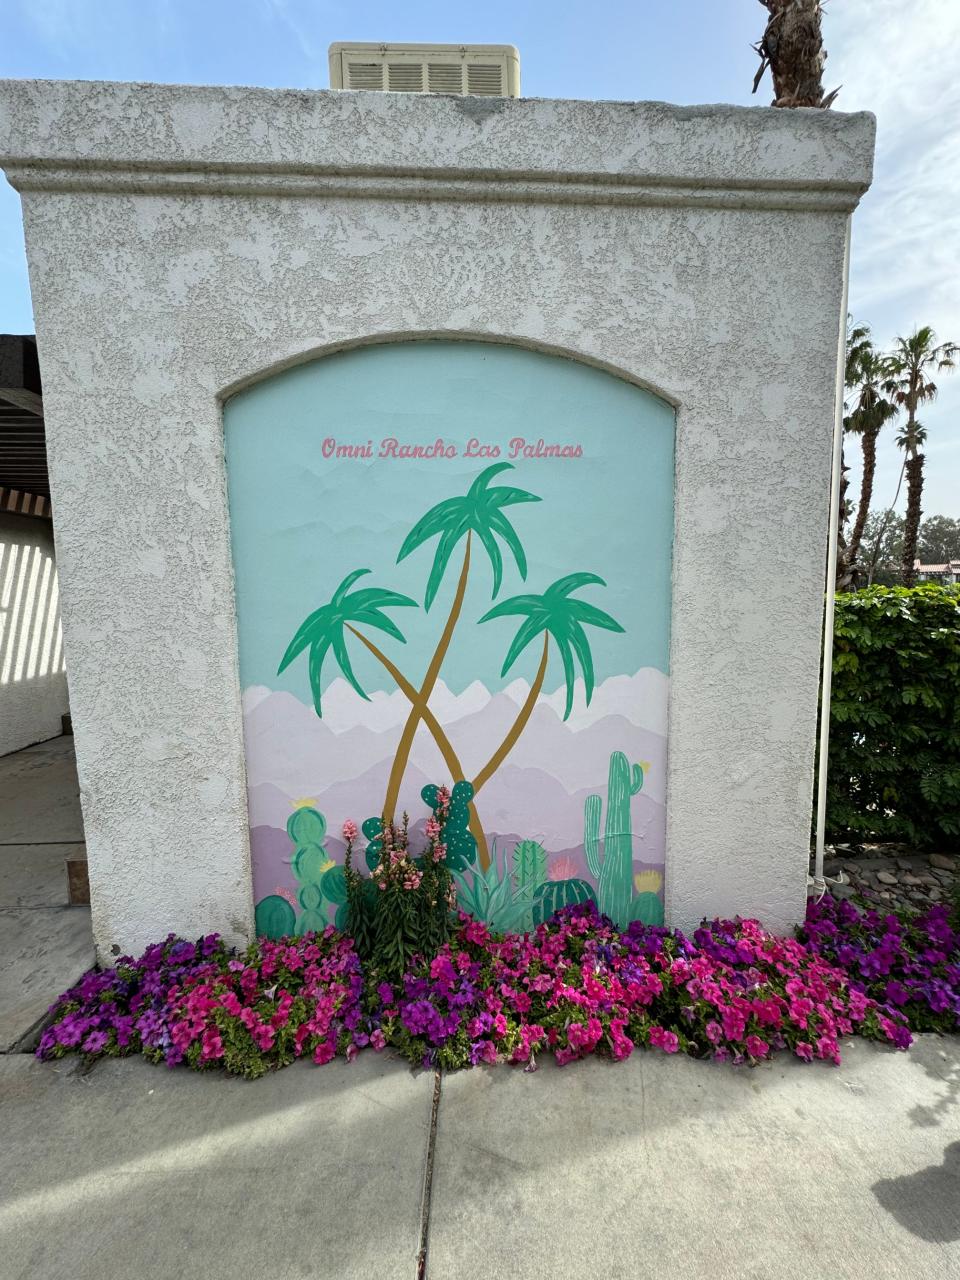 Mural of palm trees and cacti at Omni Rancho Las Palmas, surrounded by vibrant purple flowers